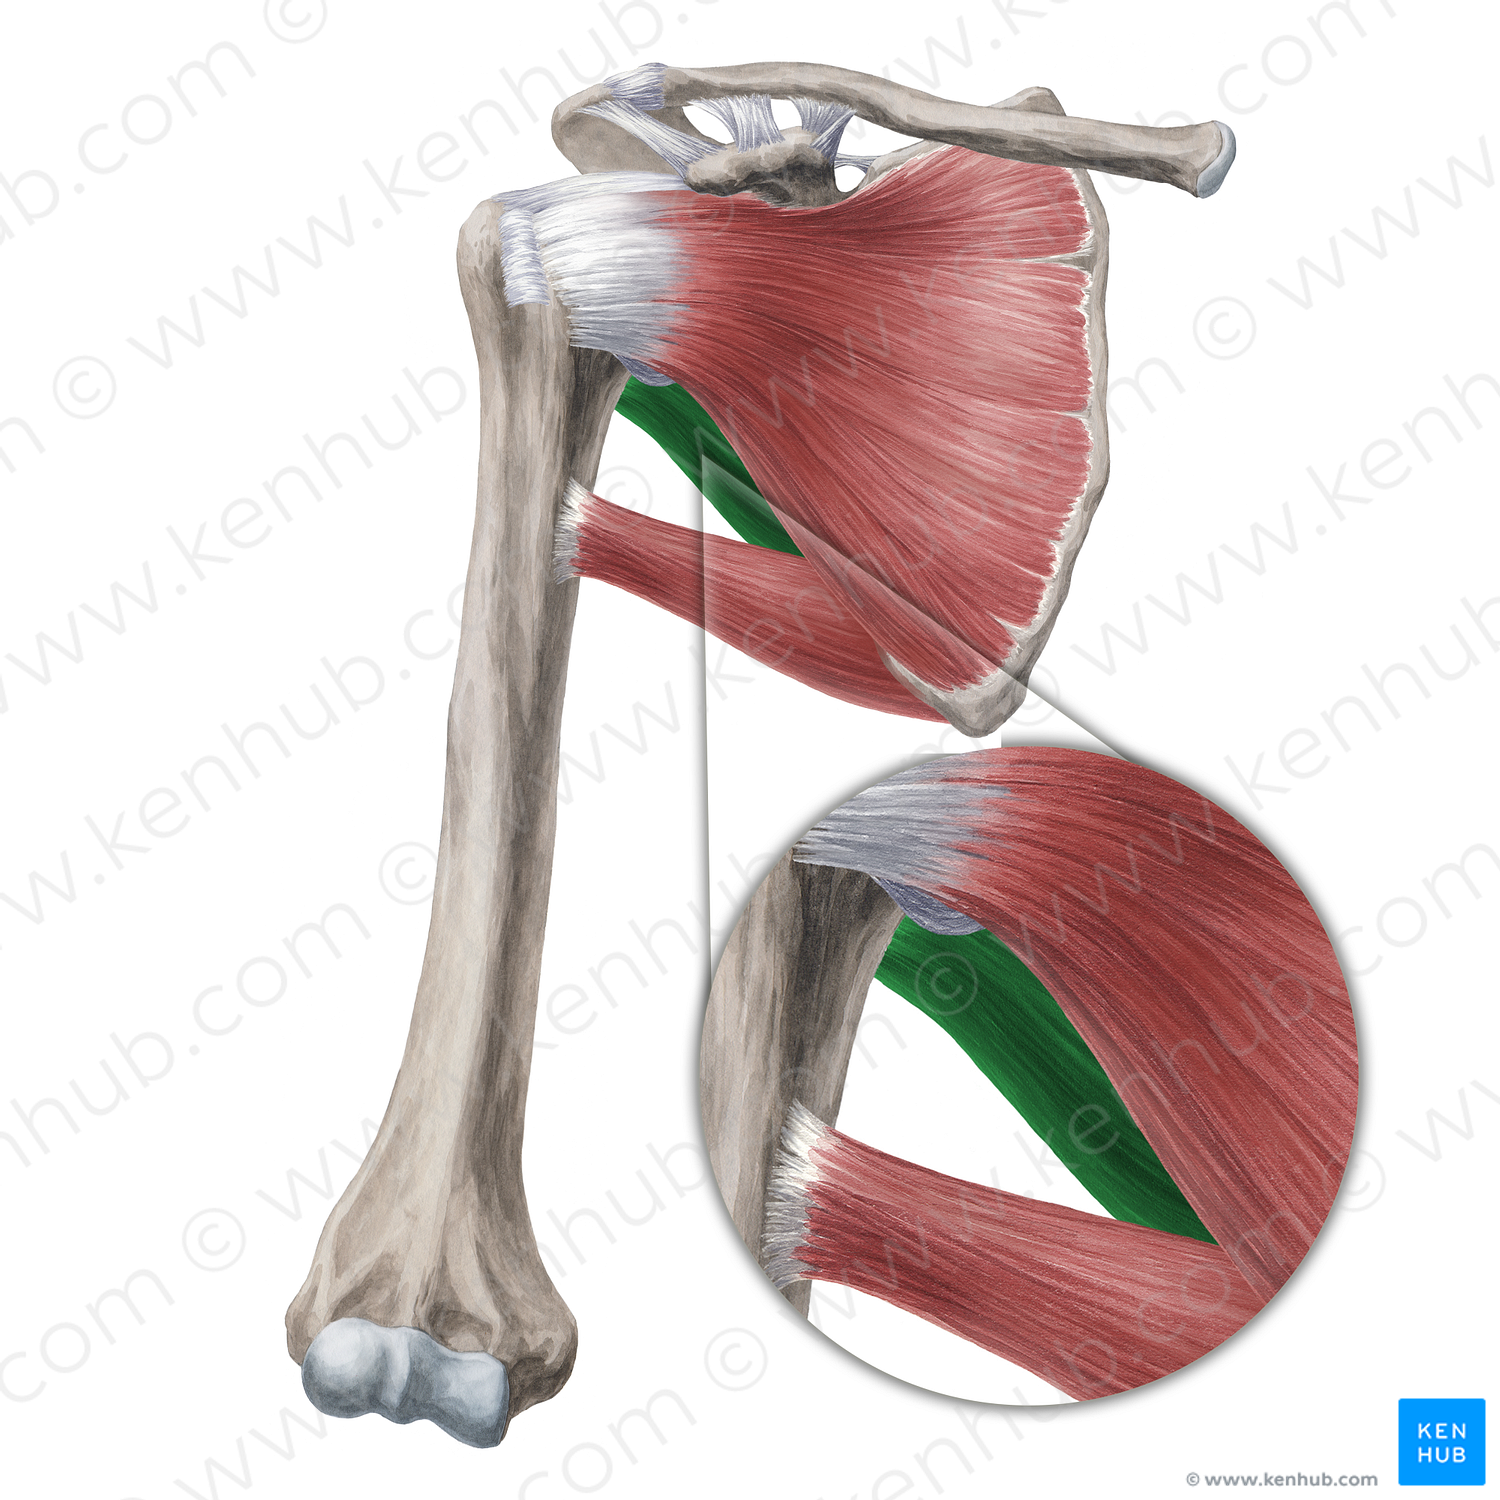 Teres minor muscle (#20000)